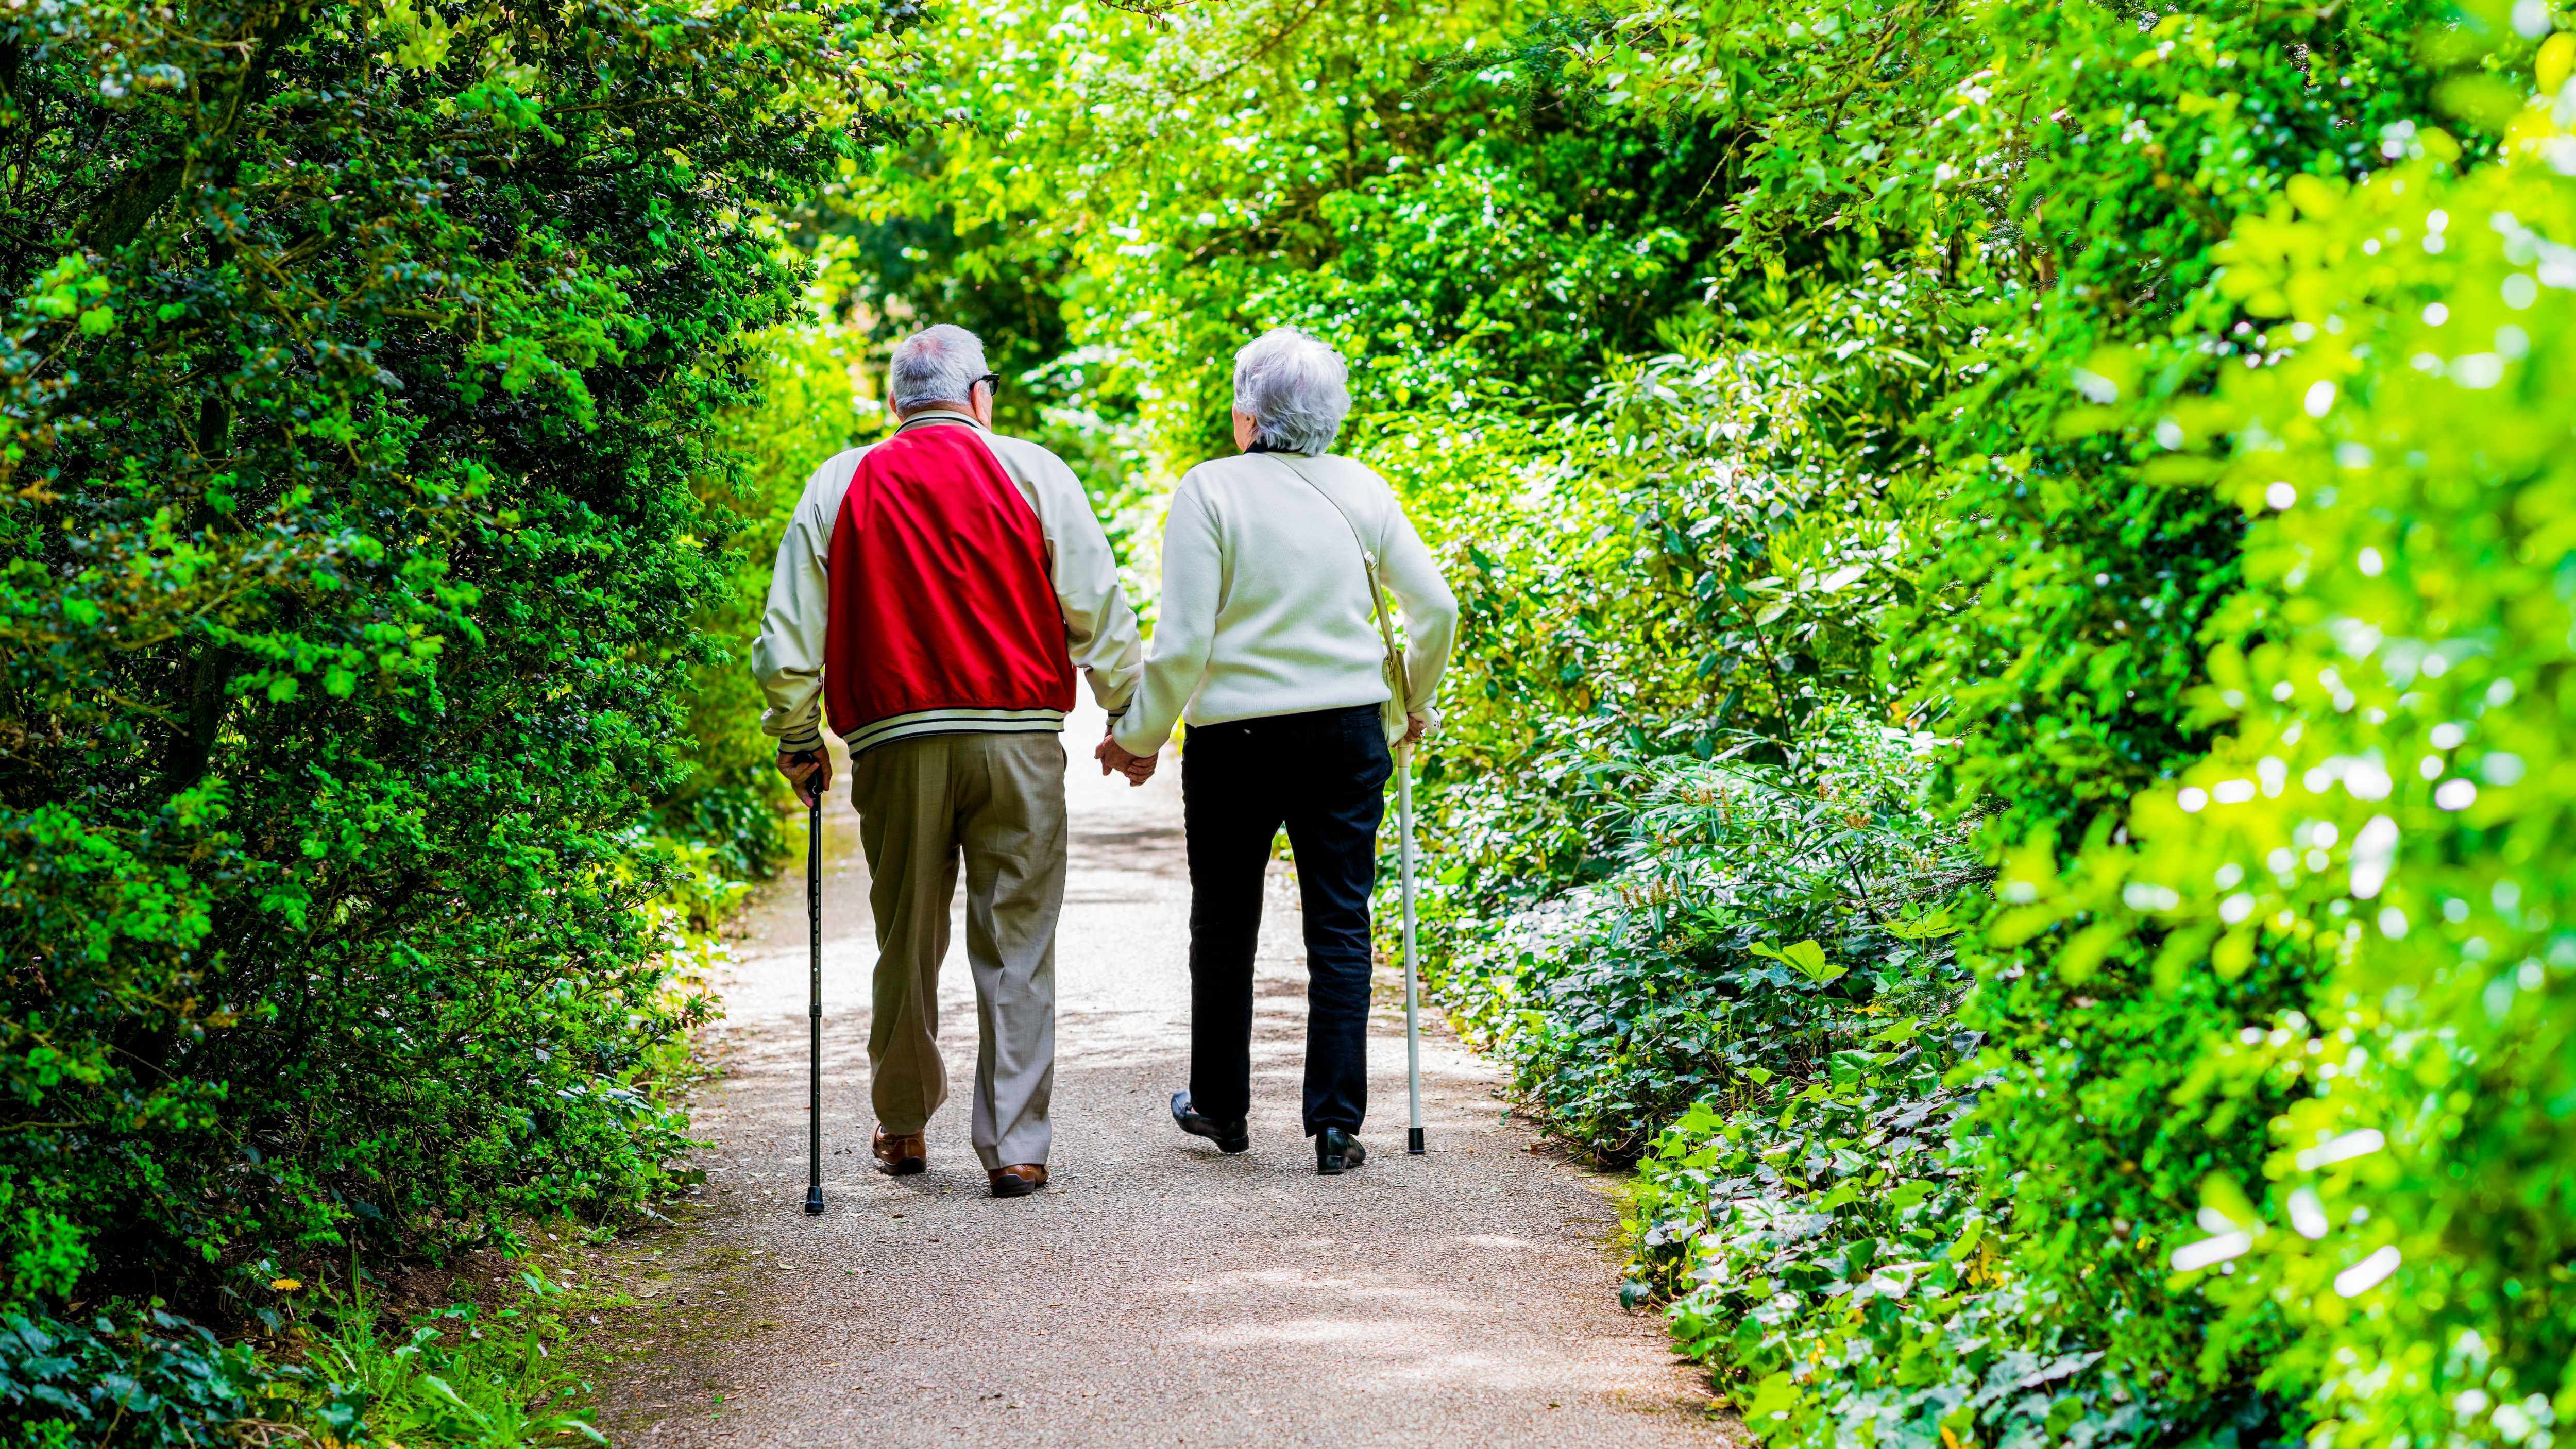 two senior citizens, elderly couple walking down a road or path